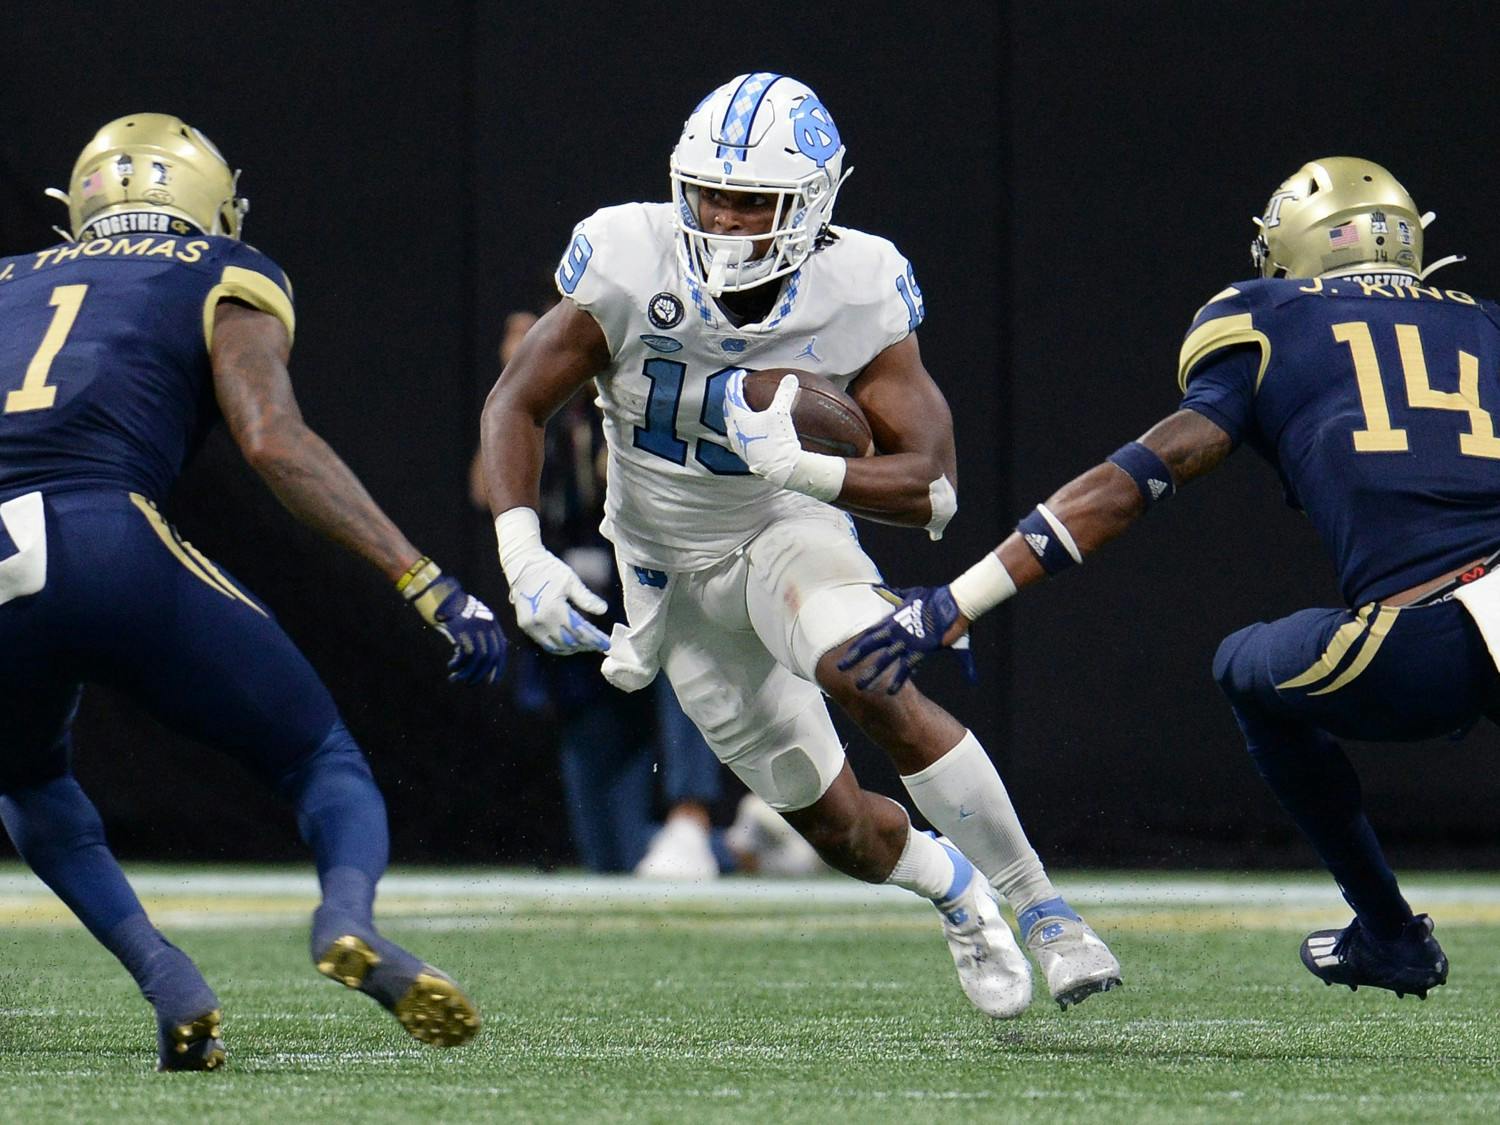 UNC graduate running back Ty Chandler (19) sprints by his opponents during UNC football's away game against Georgia Tech in the Mercedes-Benz Stadium in Atlanta, GA, on Sept. 25. Photo courtesy of UNC Athletic Communications.